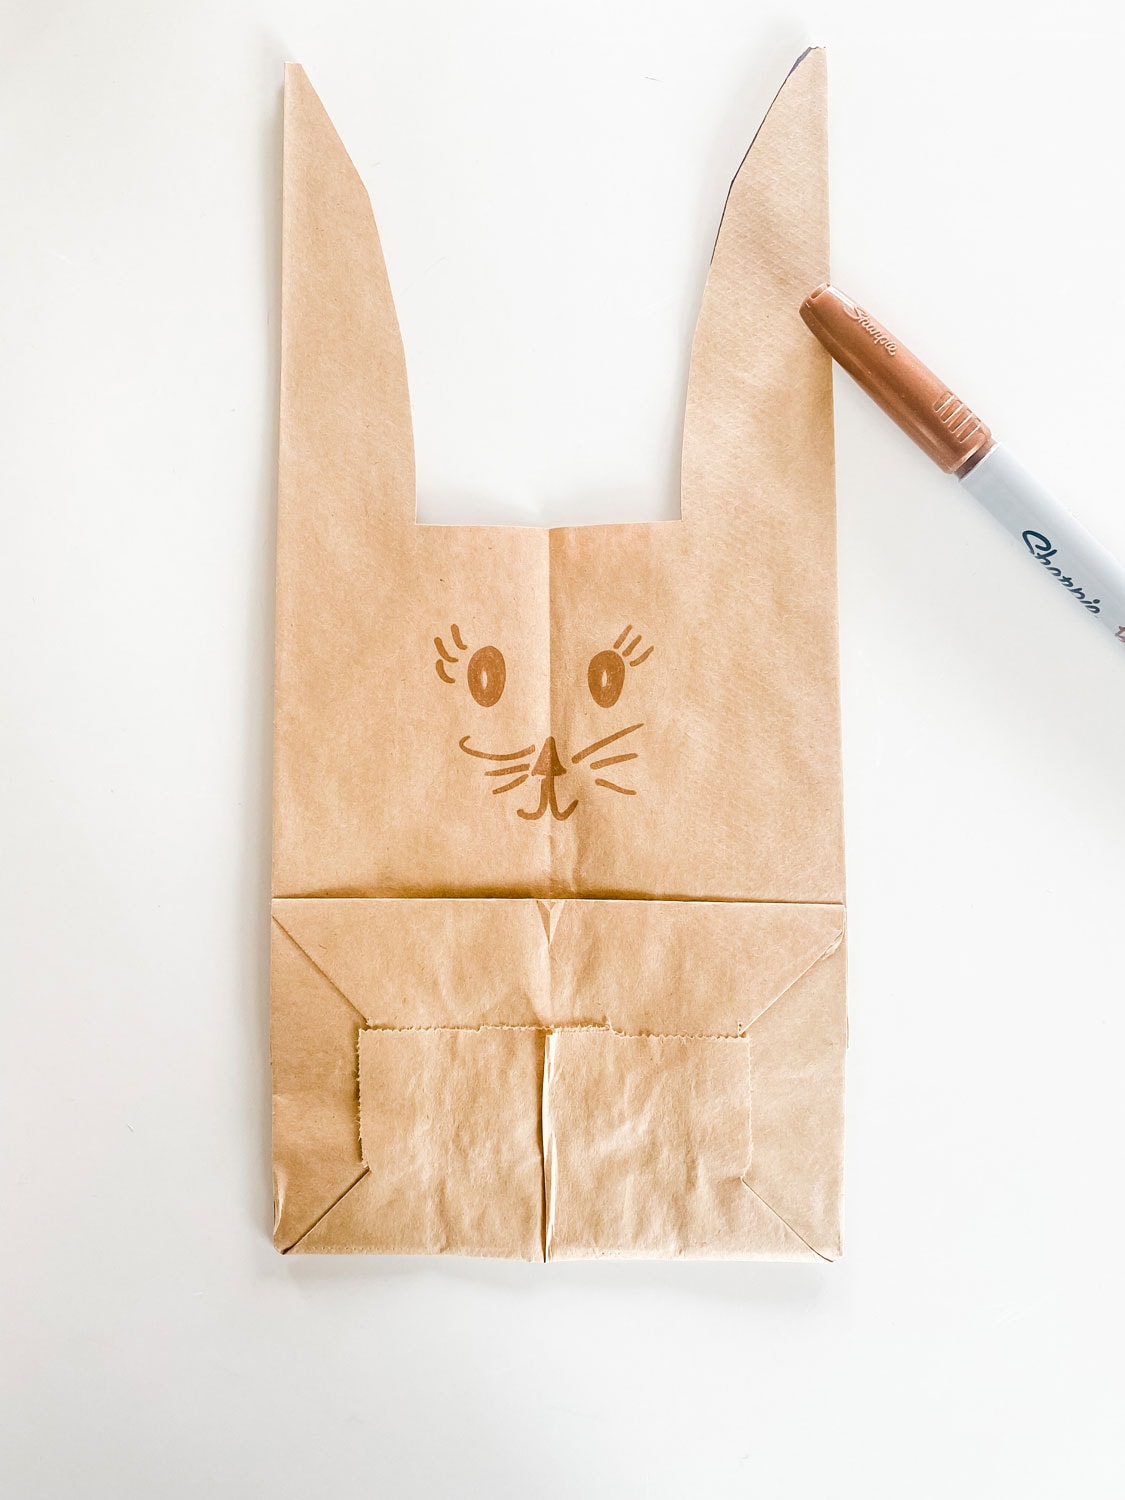 Easter Bunny Crafts - Paper Bag Rabbit - Mighty Kids